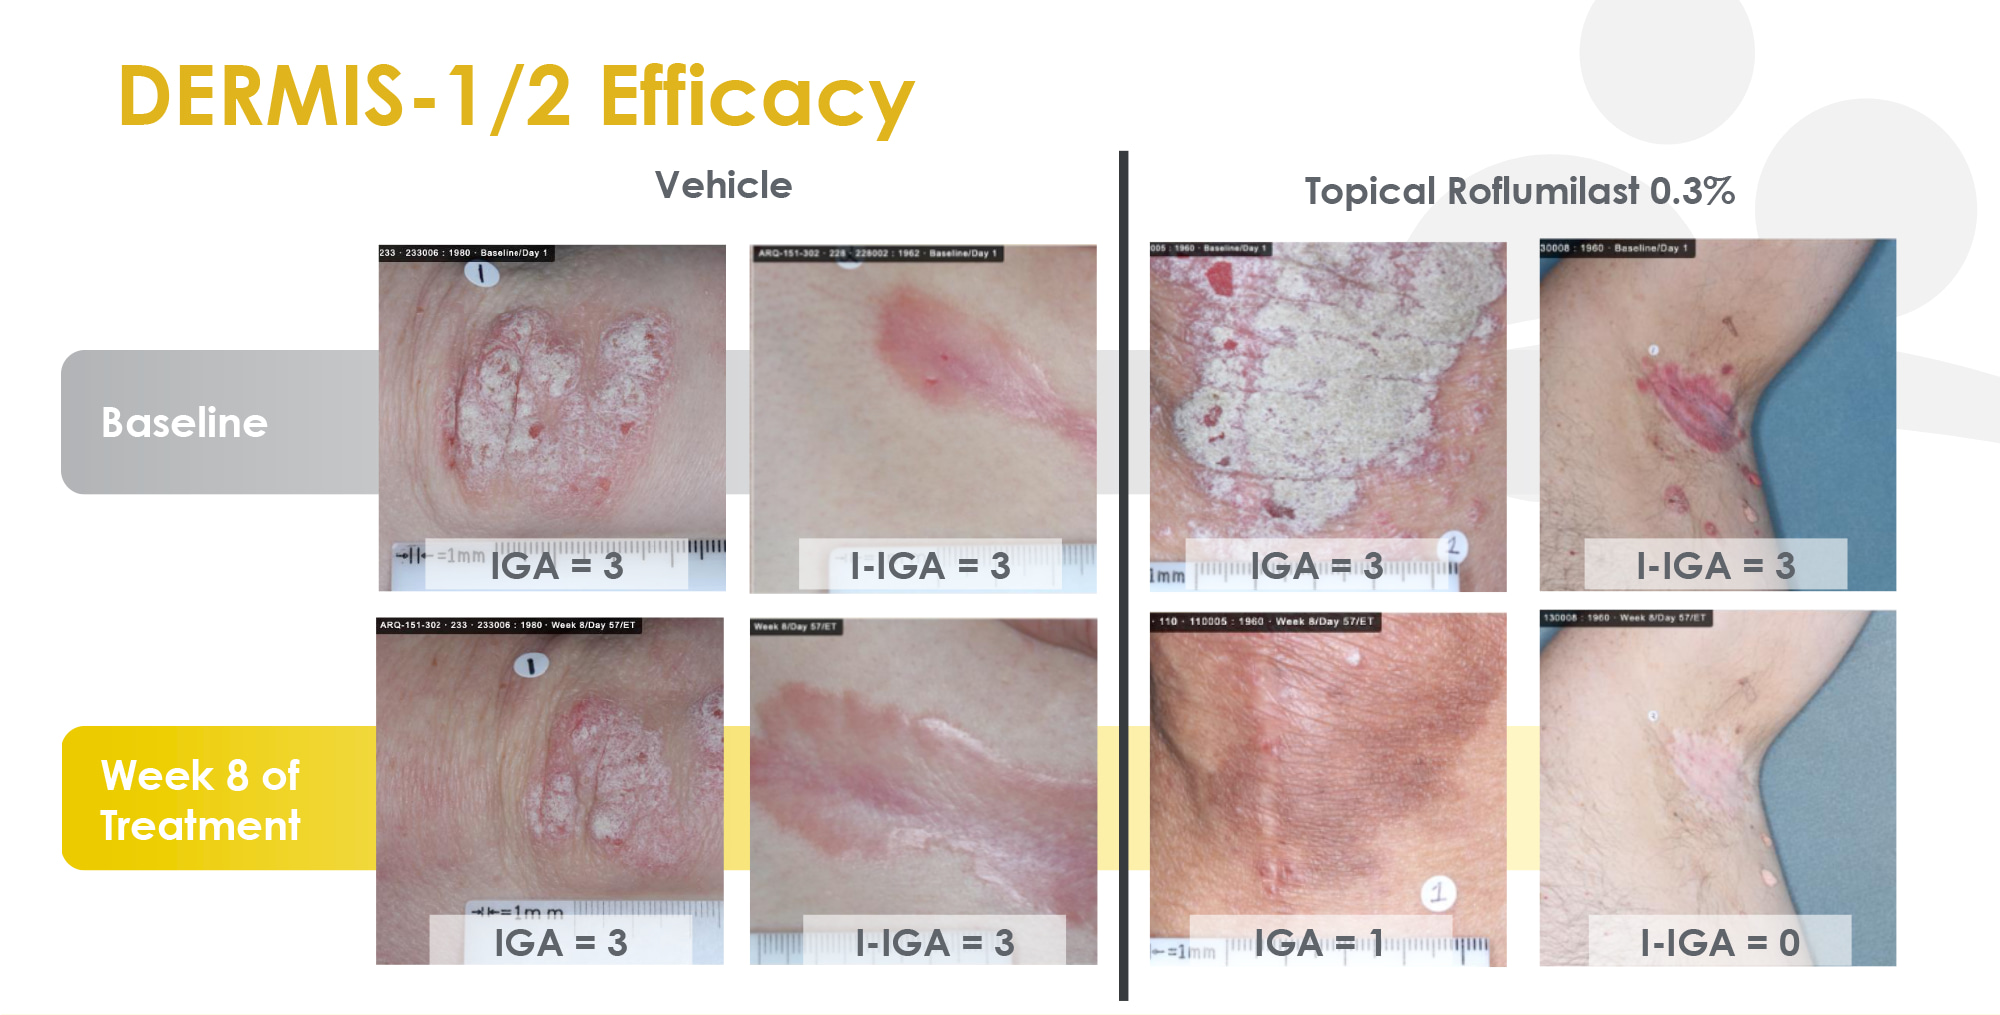 roflumilast psoriasis results 06 - Zoryve: New Effective Cream for Psoriasis